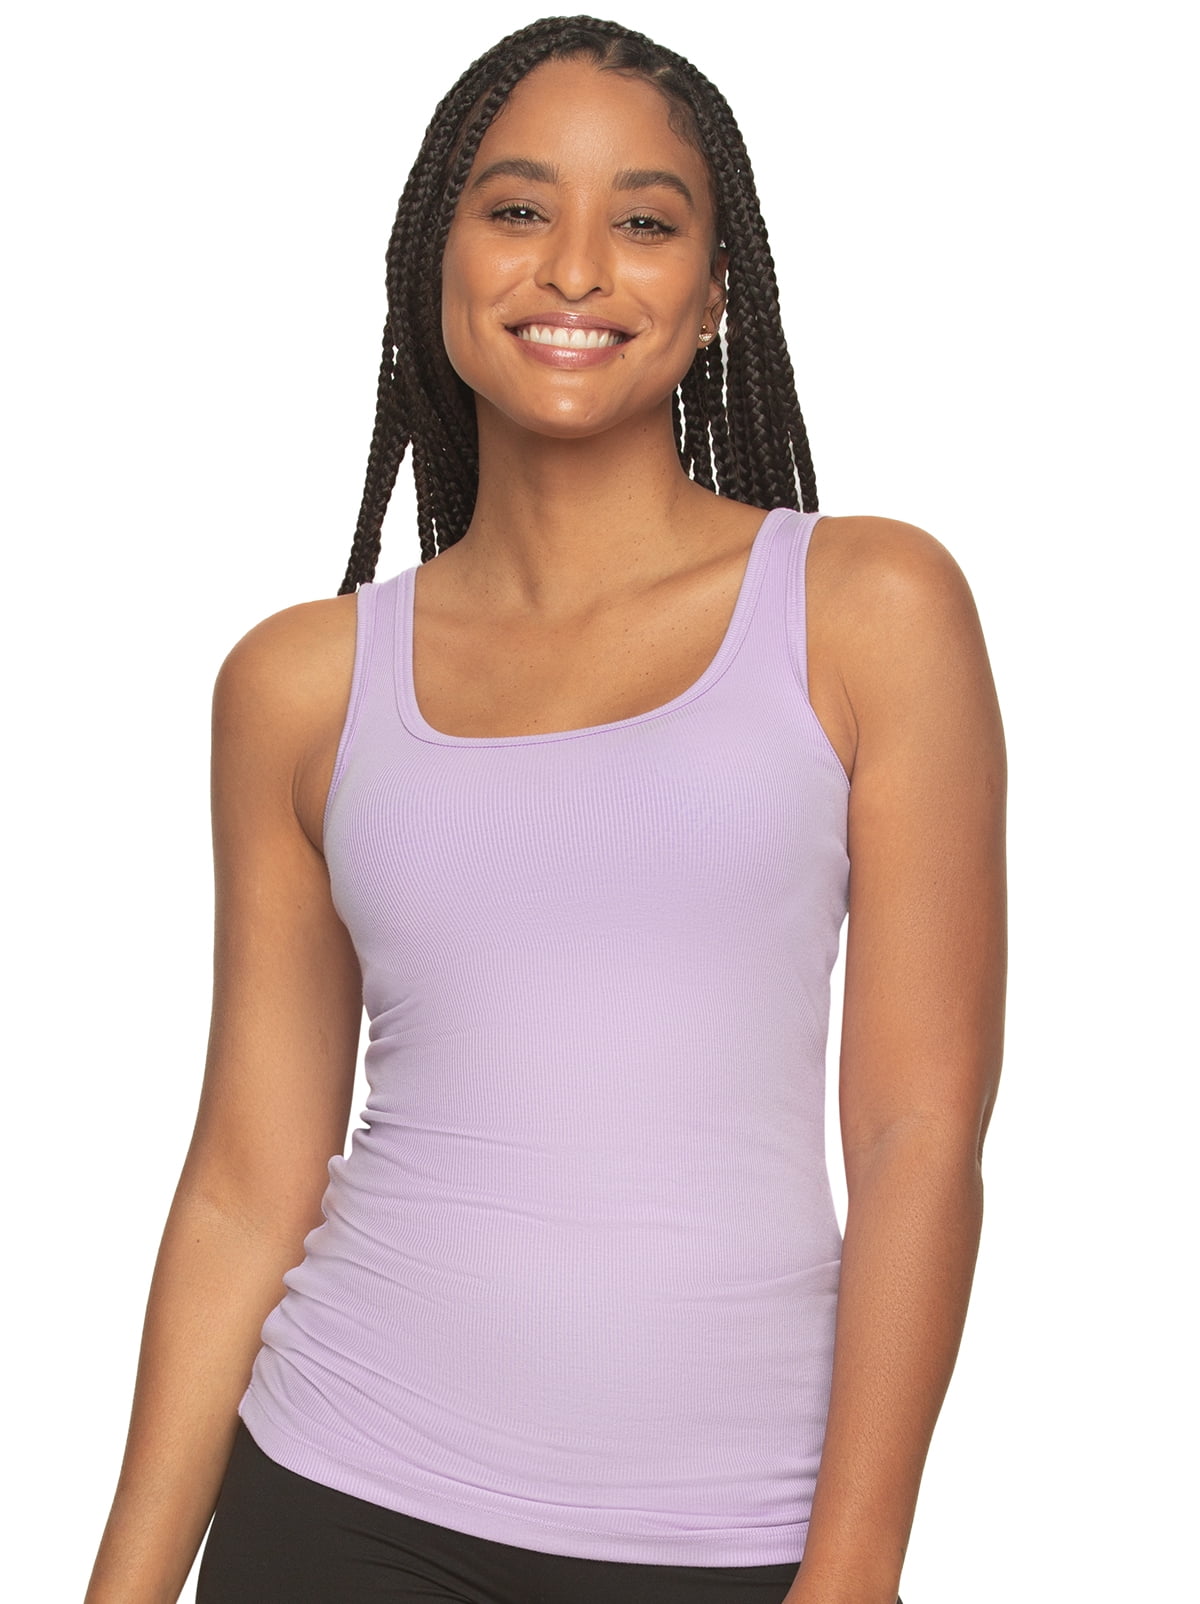 Felina Cotton Ribbed Tank Top - Class Tank Top for Women, Workout Tank Top  For Women (Color Options Available) (White, Small) 